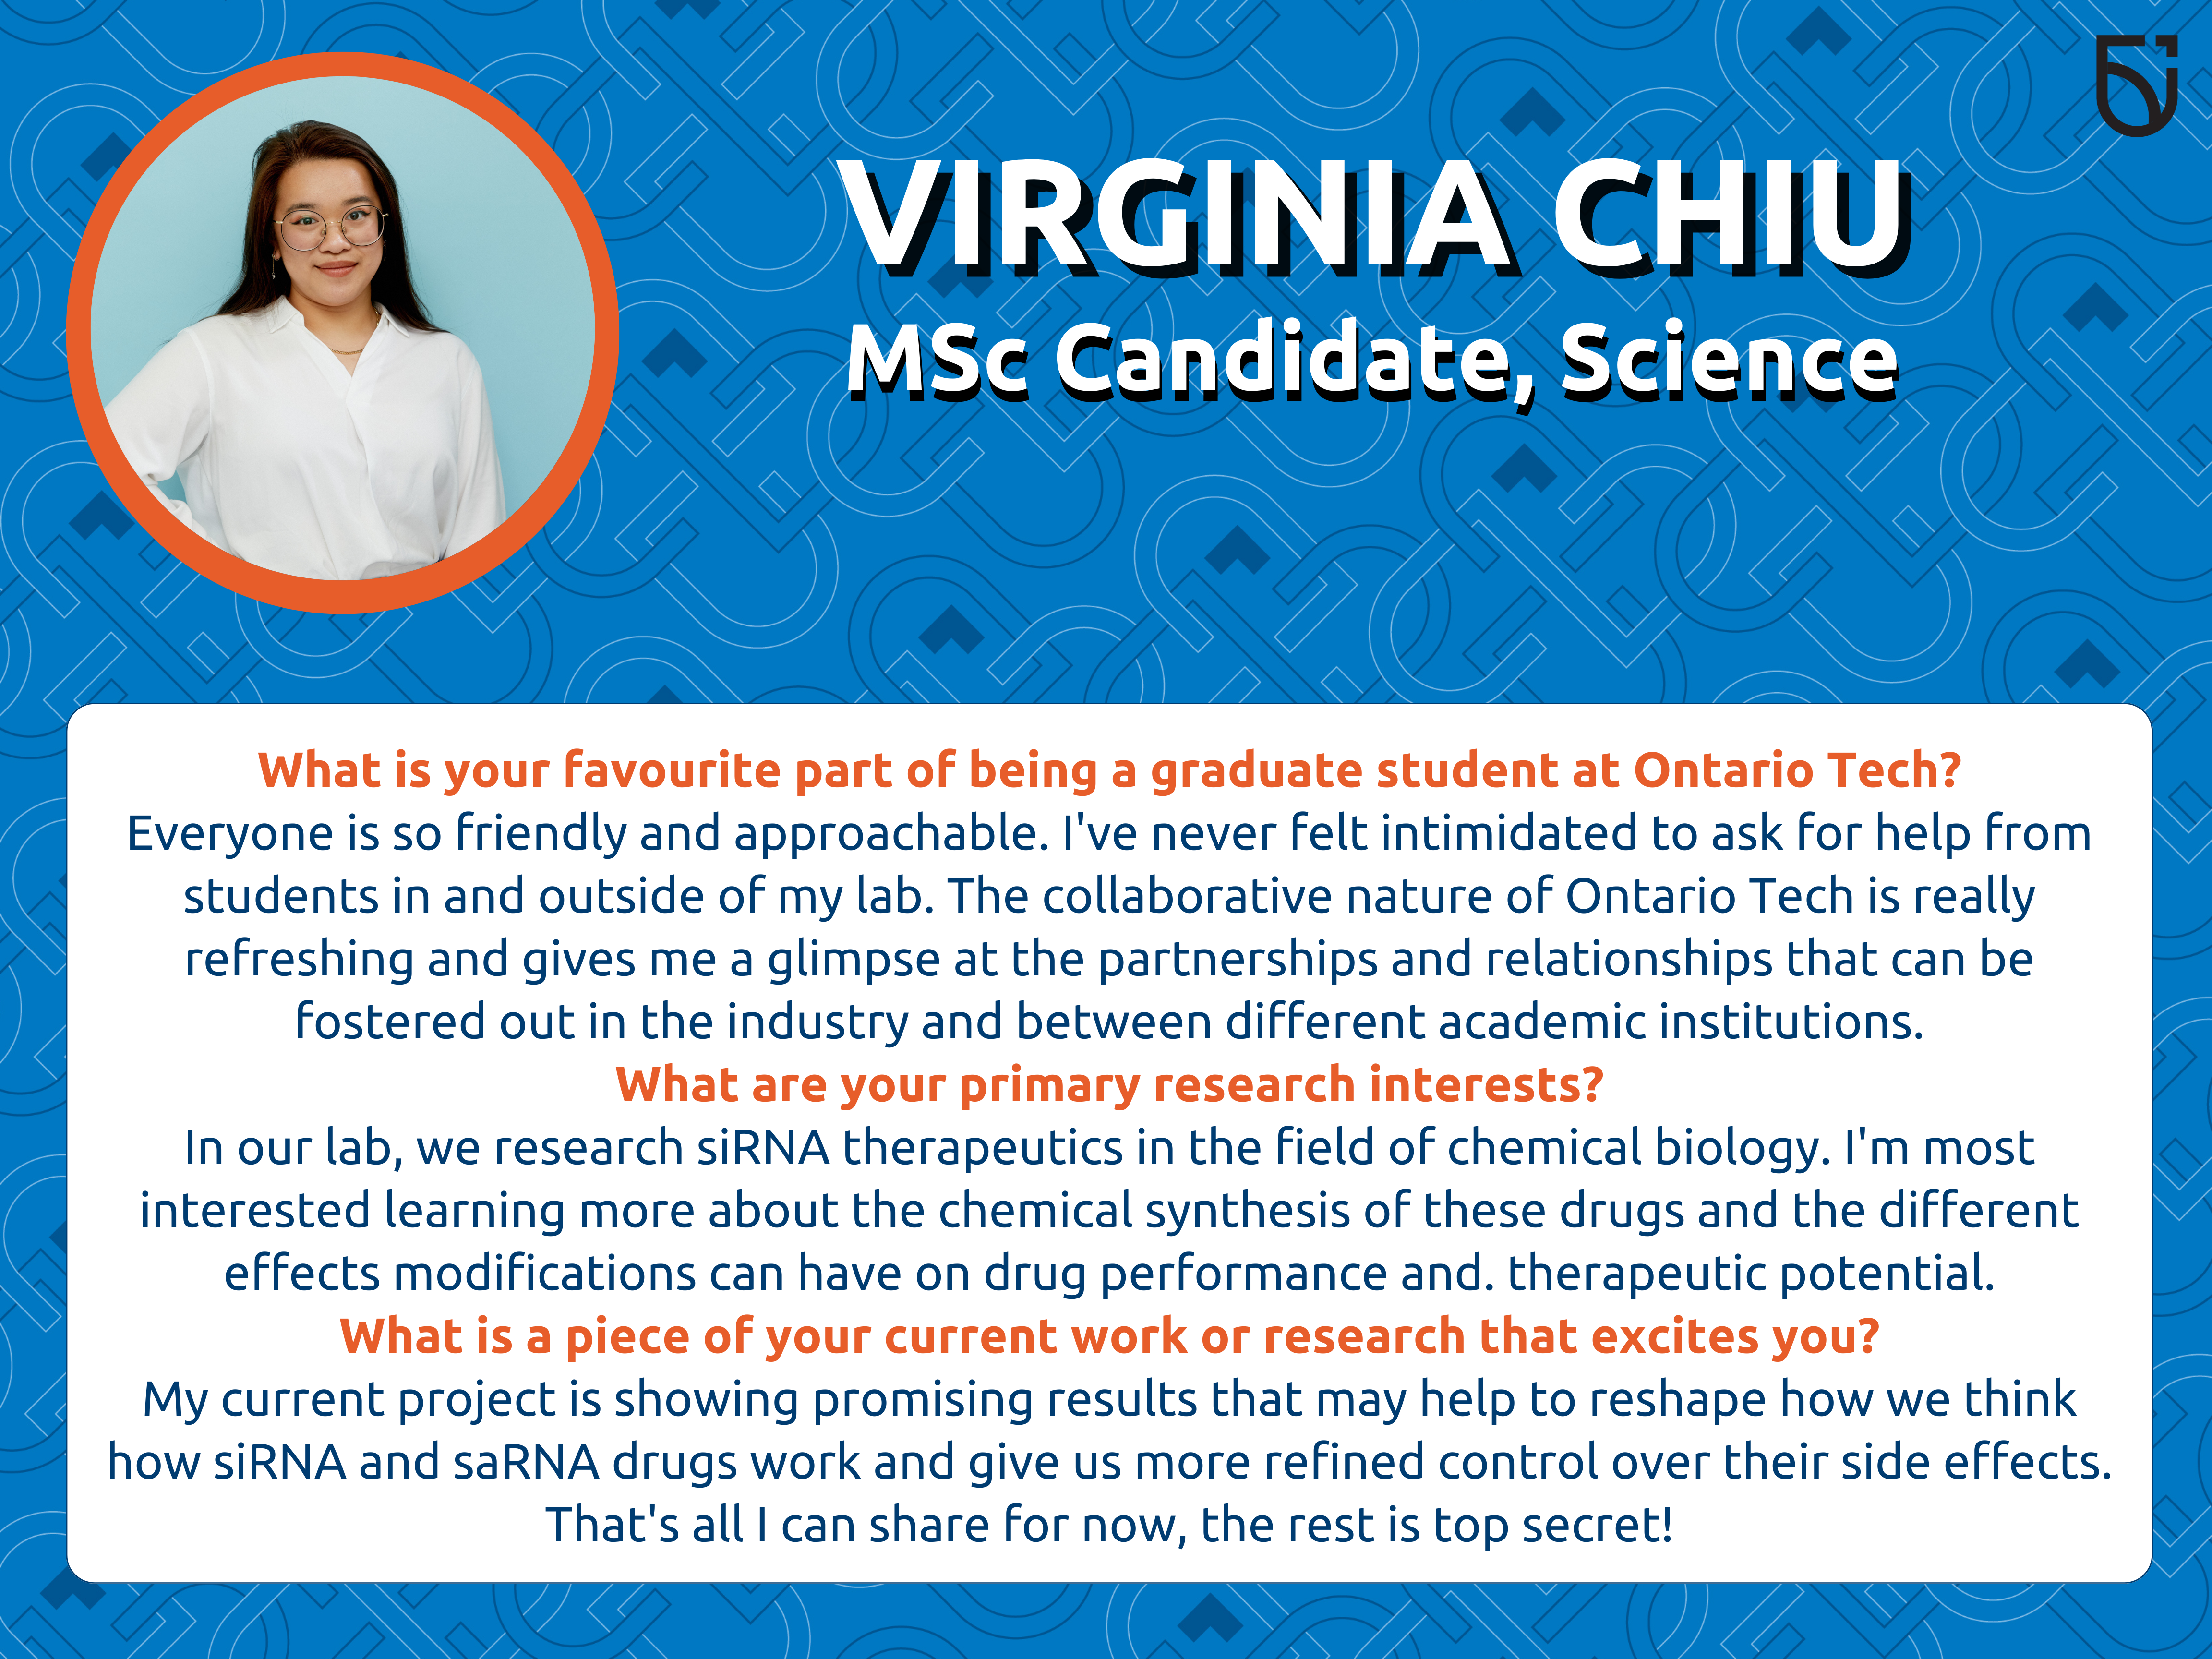 This photo is a Women’s Wednesday feature of Virginia Chiu, an MSc Candidate in the Faculty of Science.